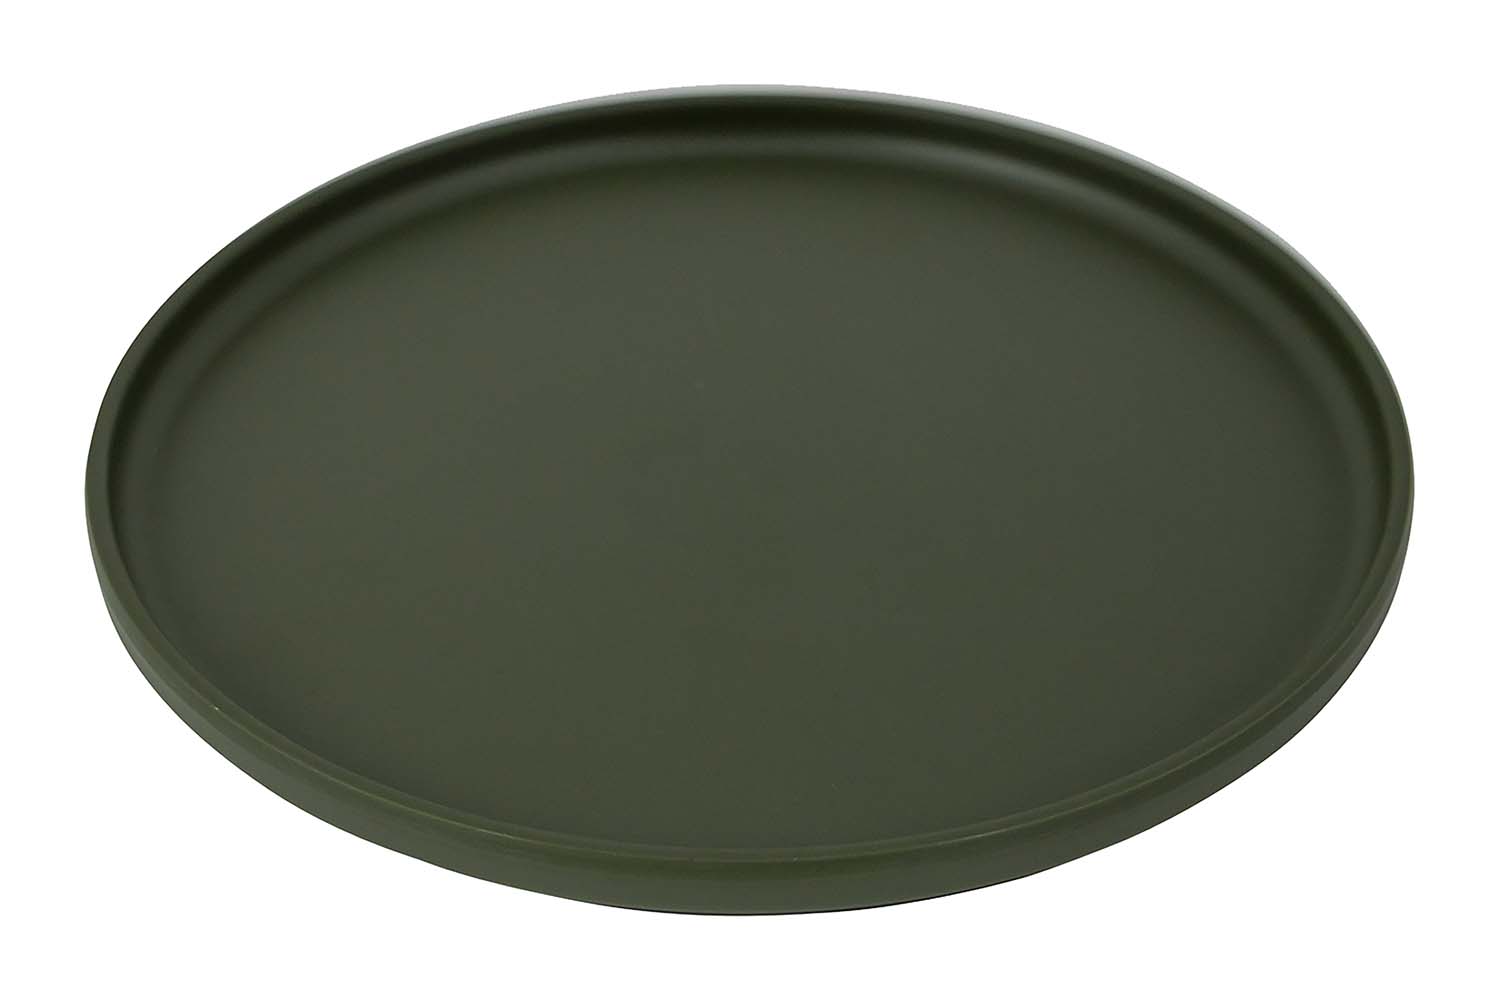 Bo-Camp - Industrial collection - Tableware - Patom - Melamine - 16 Pieces - Green detail 4